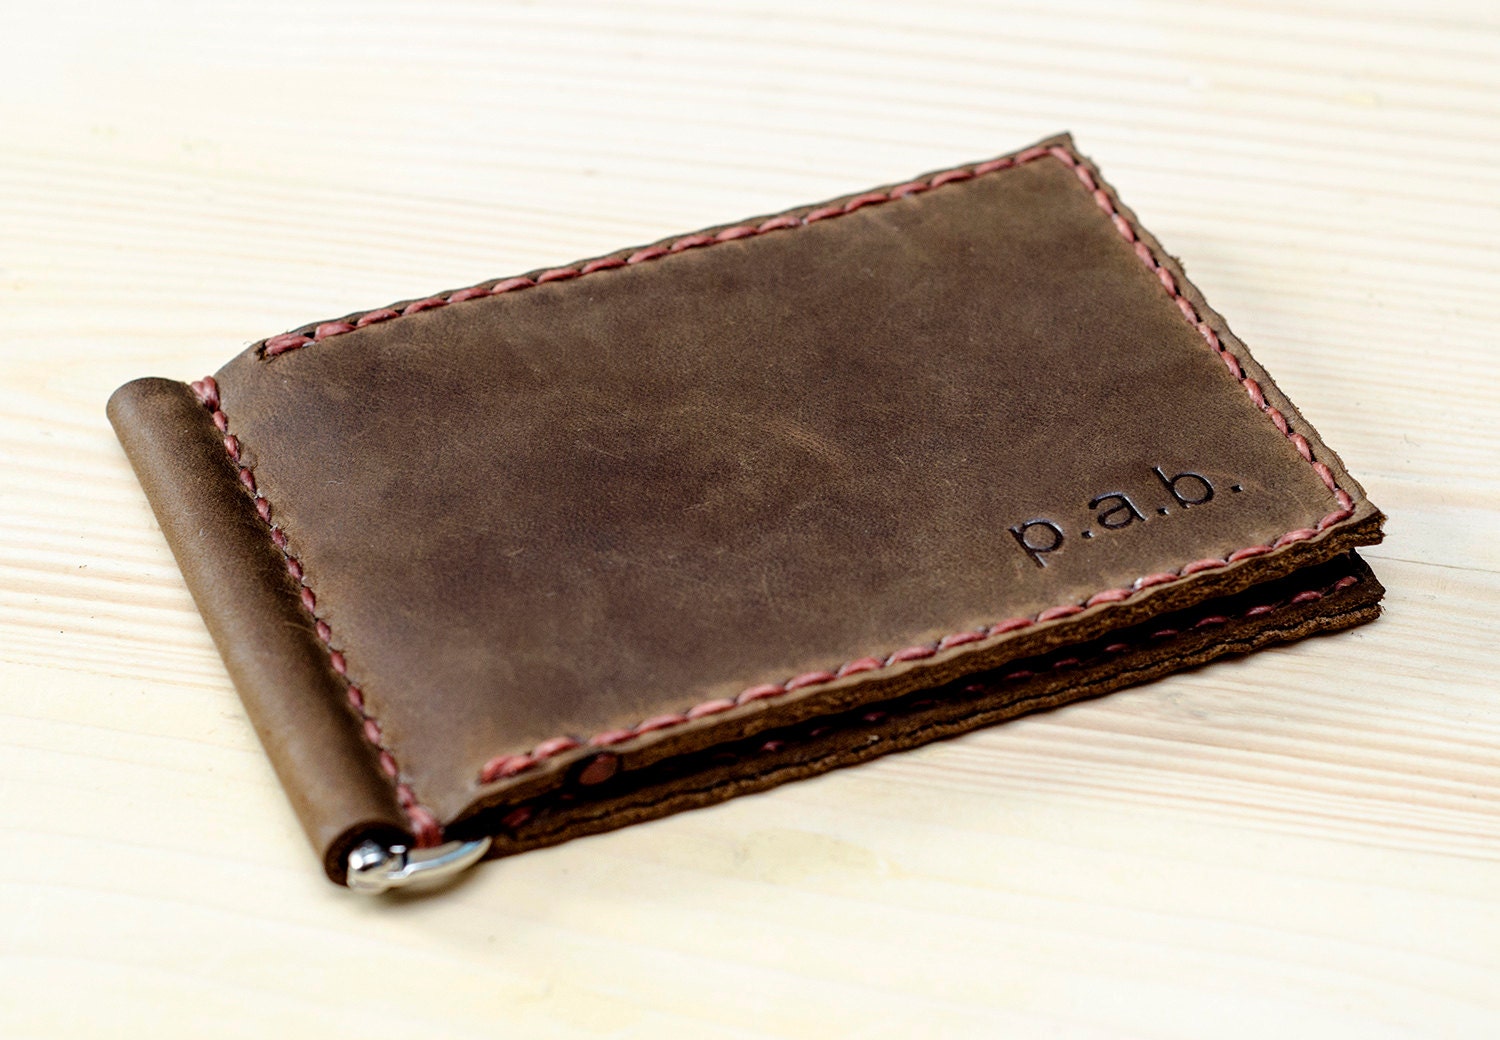 PERSONALIZED Money Clip Wallet with your name by tstudio38 on Etsy